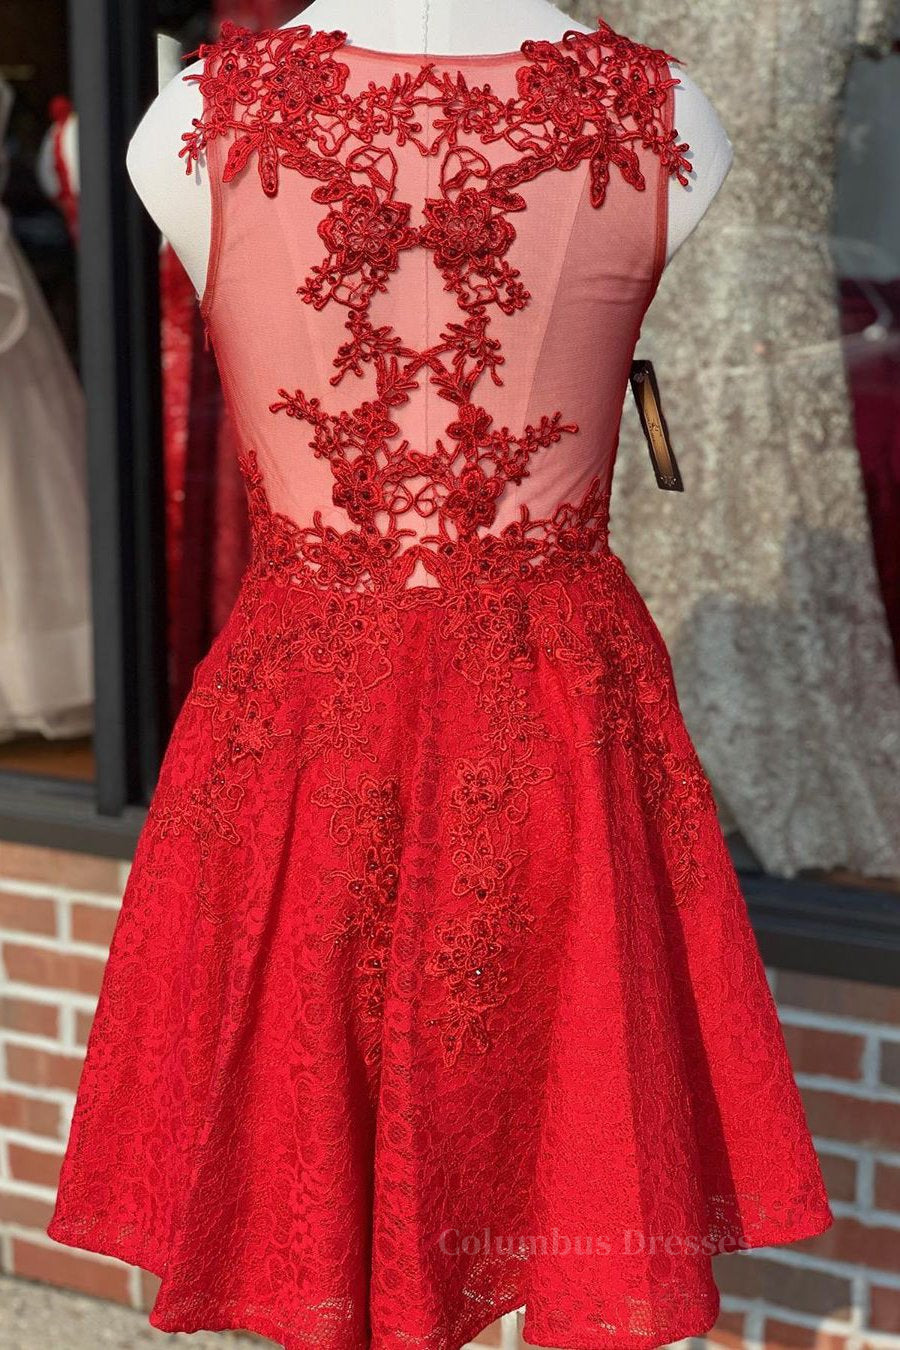 Prom Dresses For Girls, A Line V Neck Short Red Lace Prom Dress, Red Lace Formal Graduation Homecoming Dress